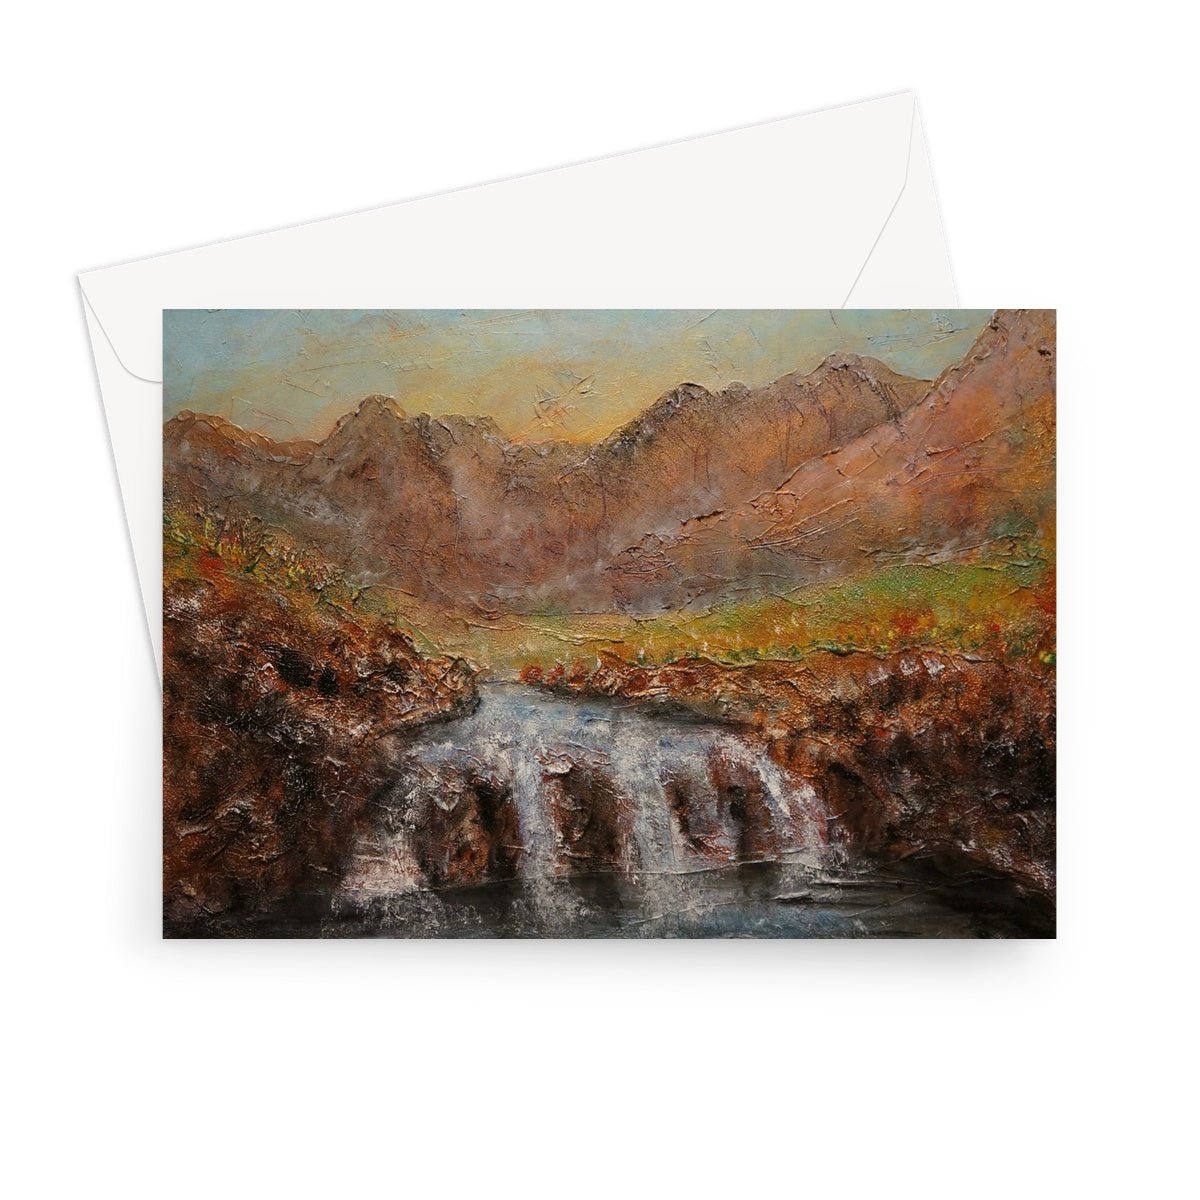 Fairy Pools Dawn Skye Art Gifts Greeting Card-Greetings Cards-Skye Art Gallery-7"x5"-10 Cards-Paintings, Prints, Homeware, Art Gifts From Scotland By Scottish Artist Kevin Hunter